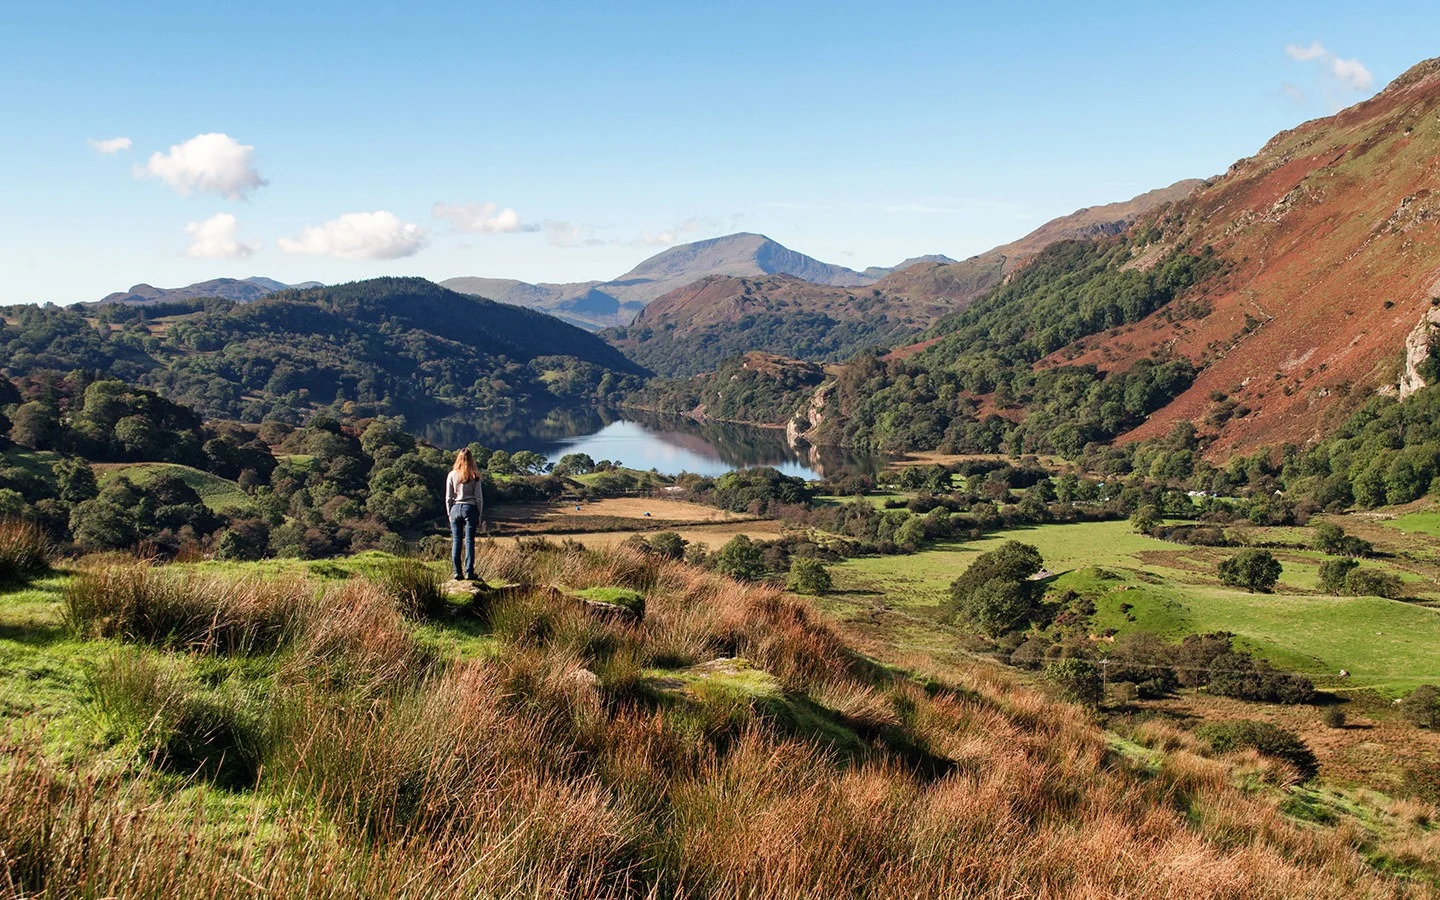 A road trip through Snowdonia National Park in North Wales, with clear lakes, mountain peaks and forests – could this be Wales' most scenic driving route?